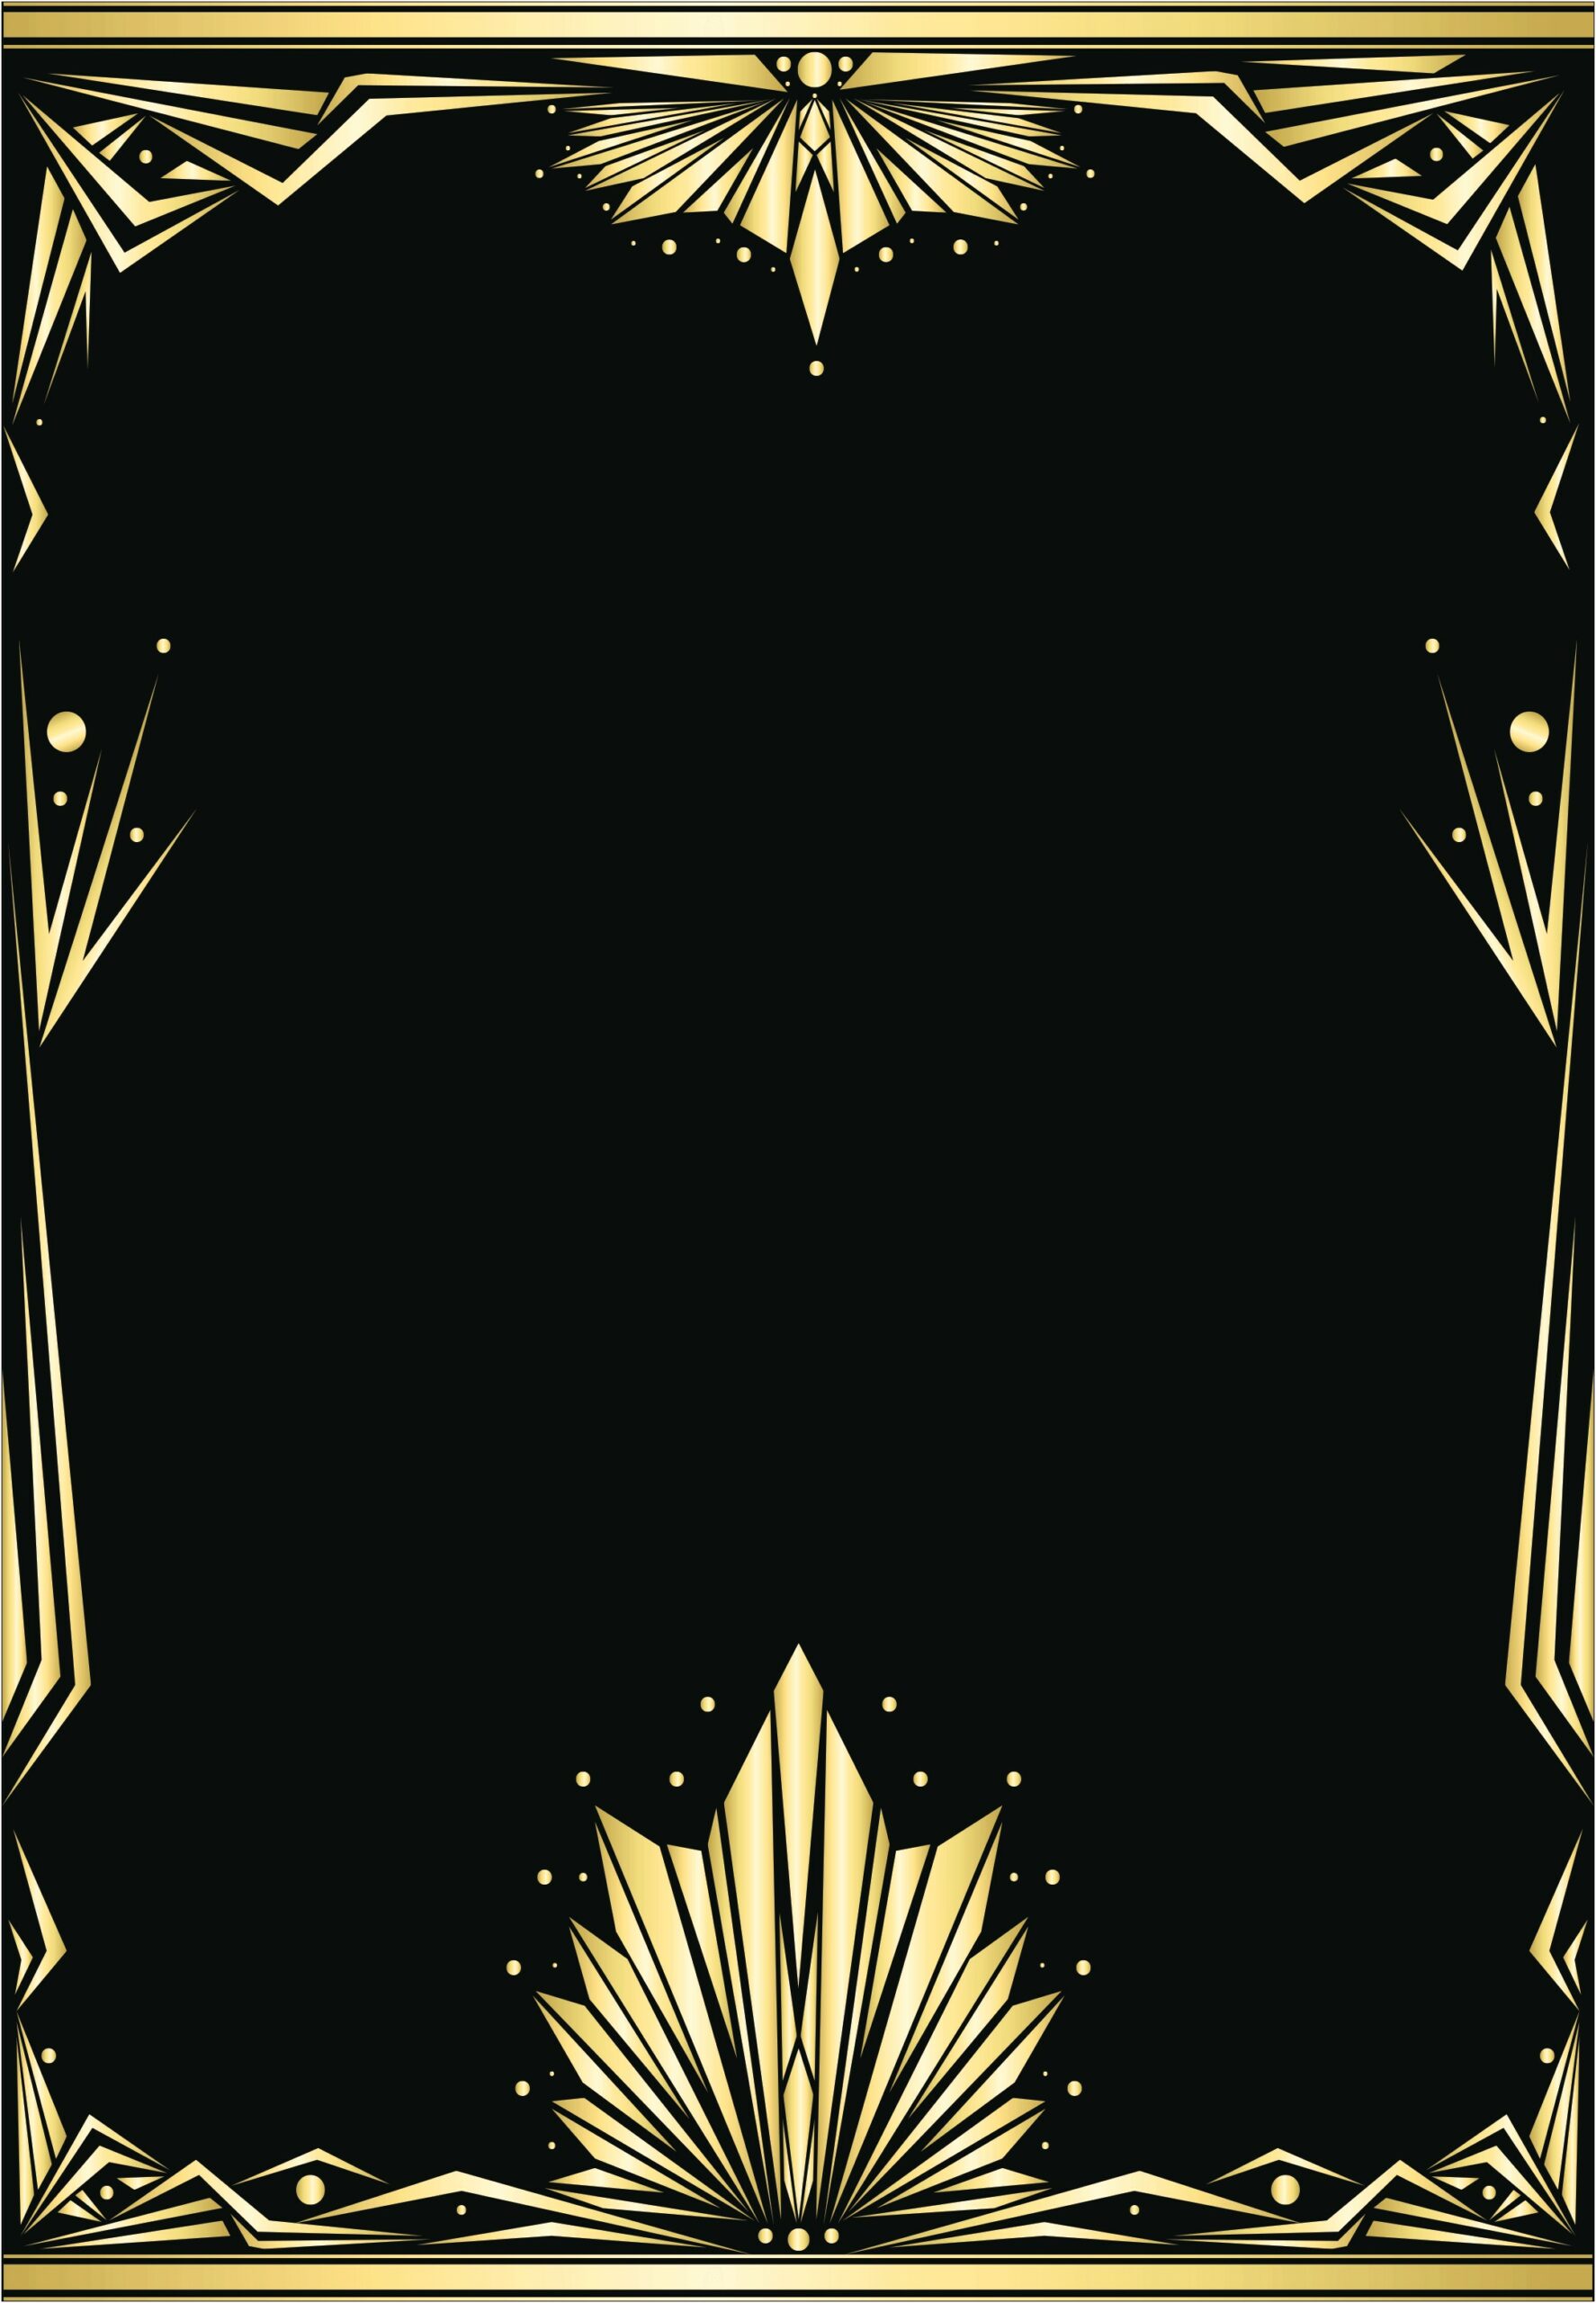 1920's Flapper Border Template Free